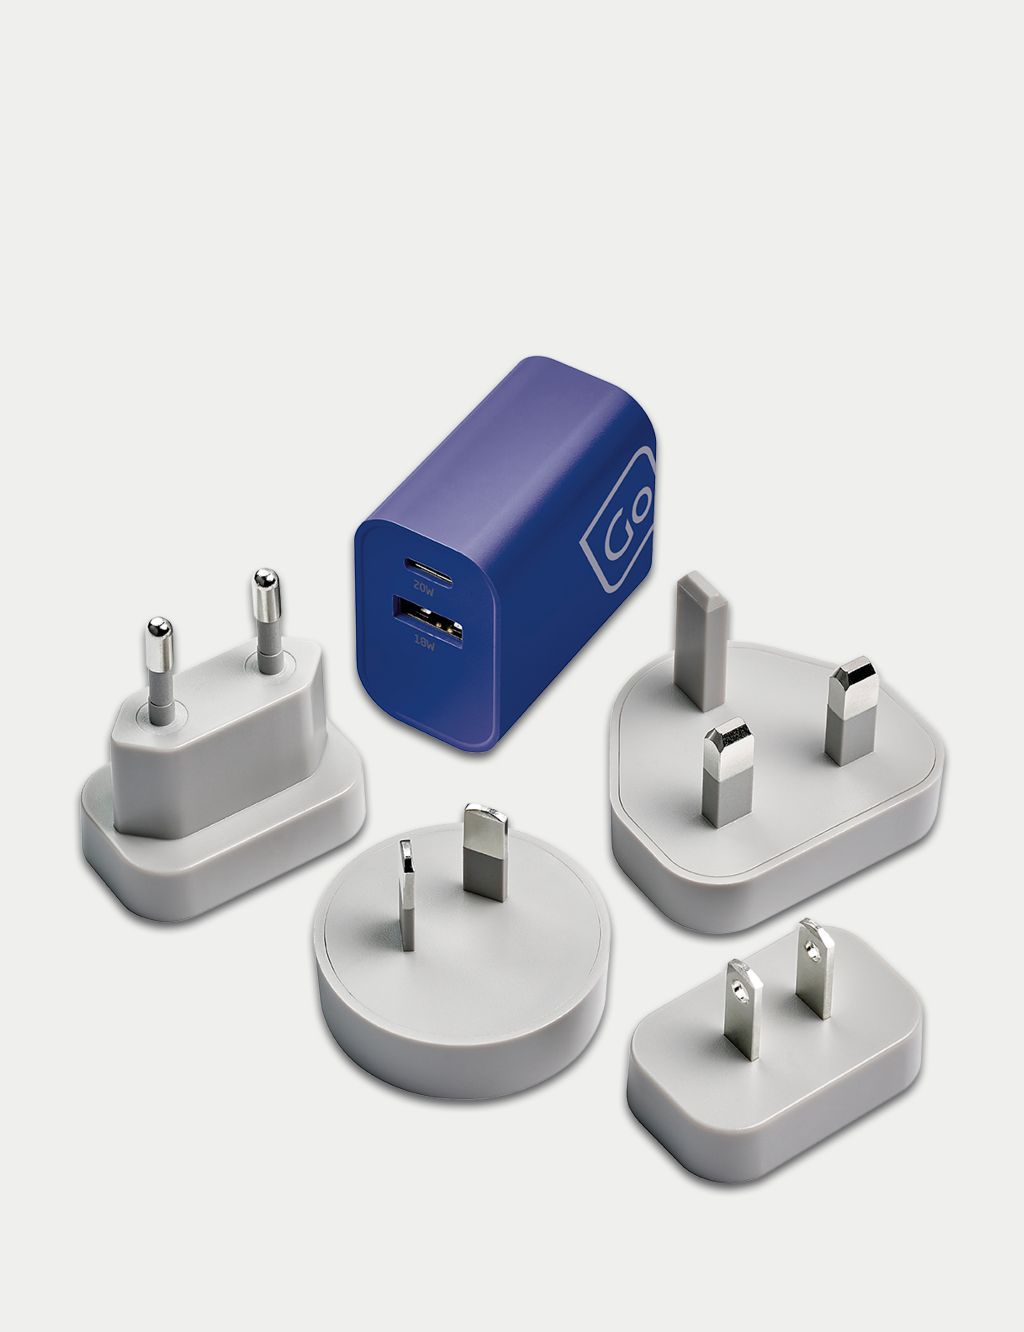 Worldwide USB A & C Charger